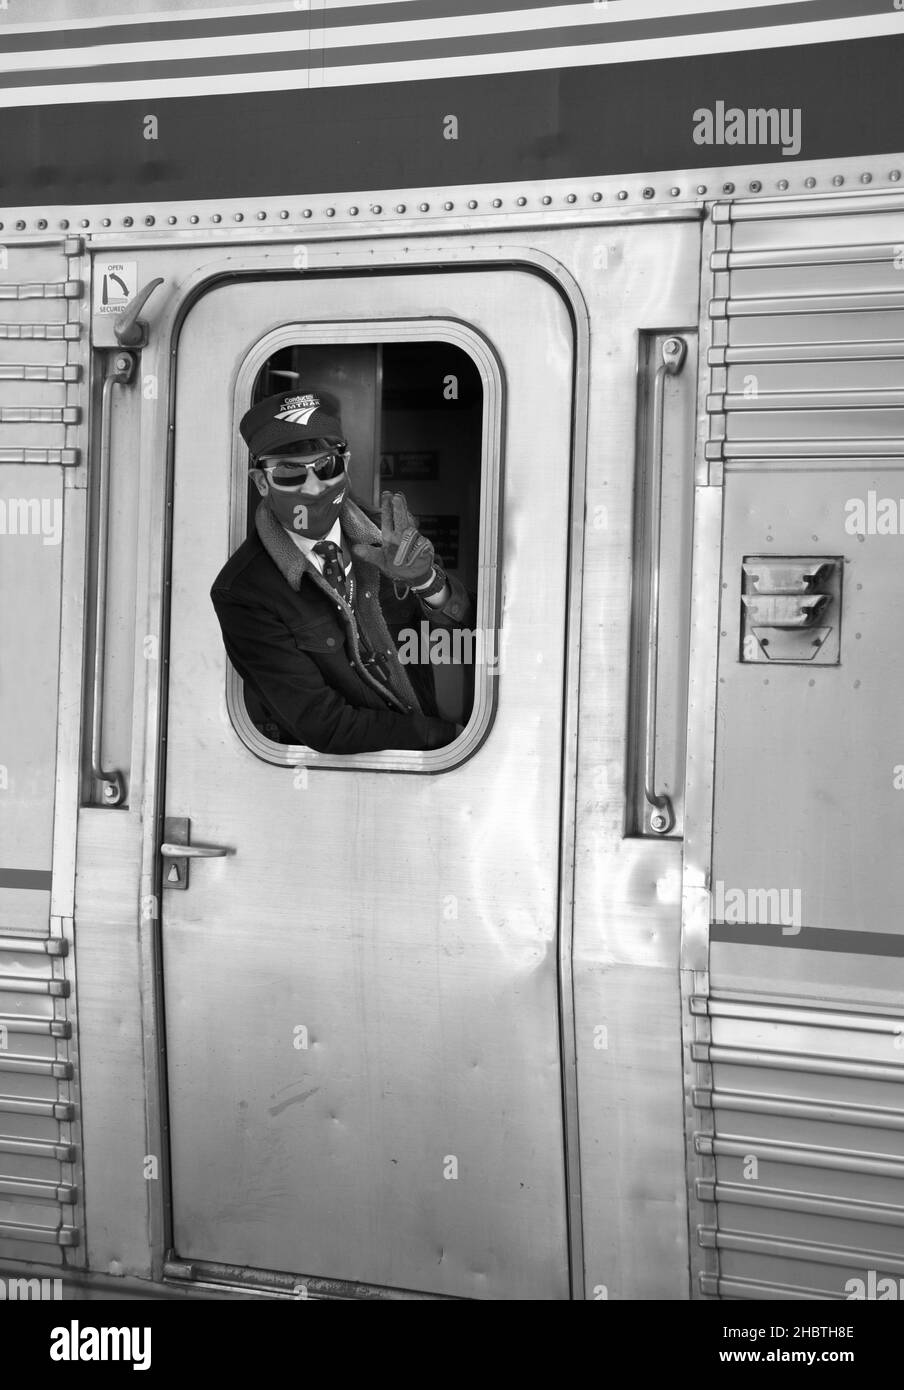 An Amtrak conductor waves as the passenger train departs from the station in Lamy, New Mexico, with service between Chicago and Los Angeles. Stock Photo